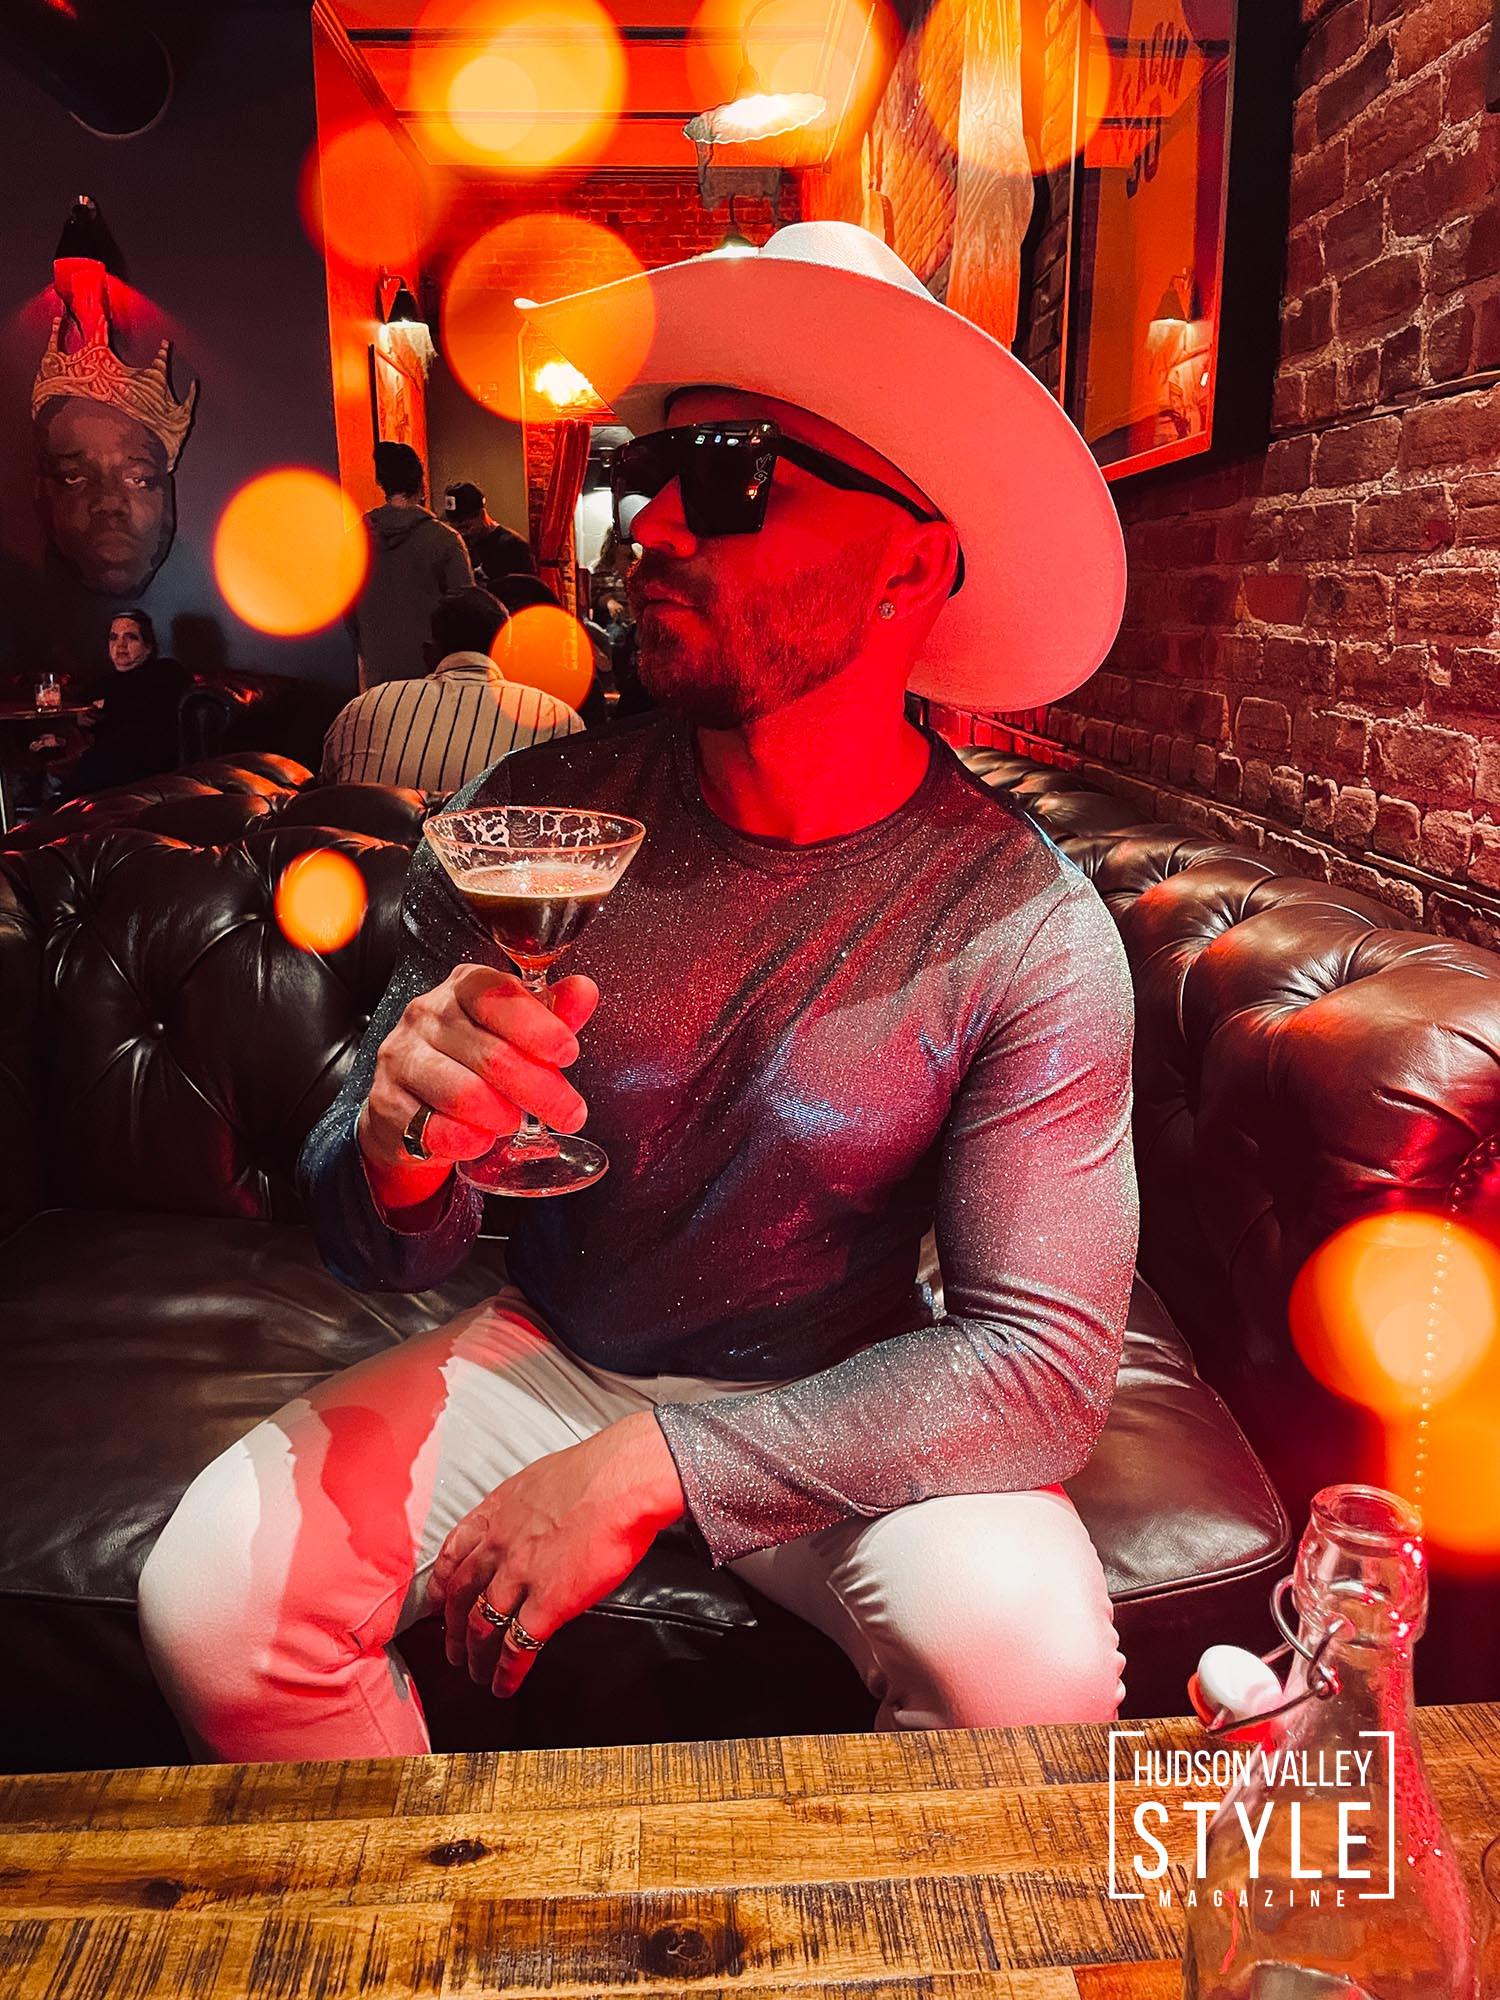 The Vinyl Room in Beacon, NY – Where Food, Music, Dancing, and Nightlife Collide – Hudson Valley Nightlife Reviews with Fitness Model Maxwell Alexander – Presented by Alluvion Vacations